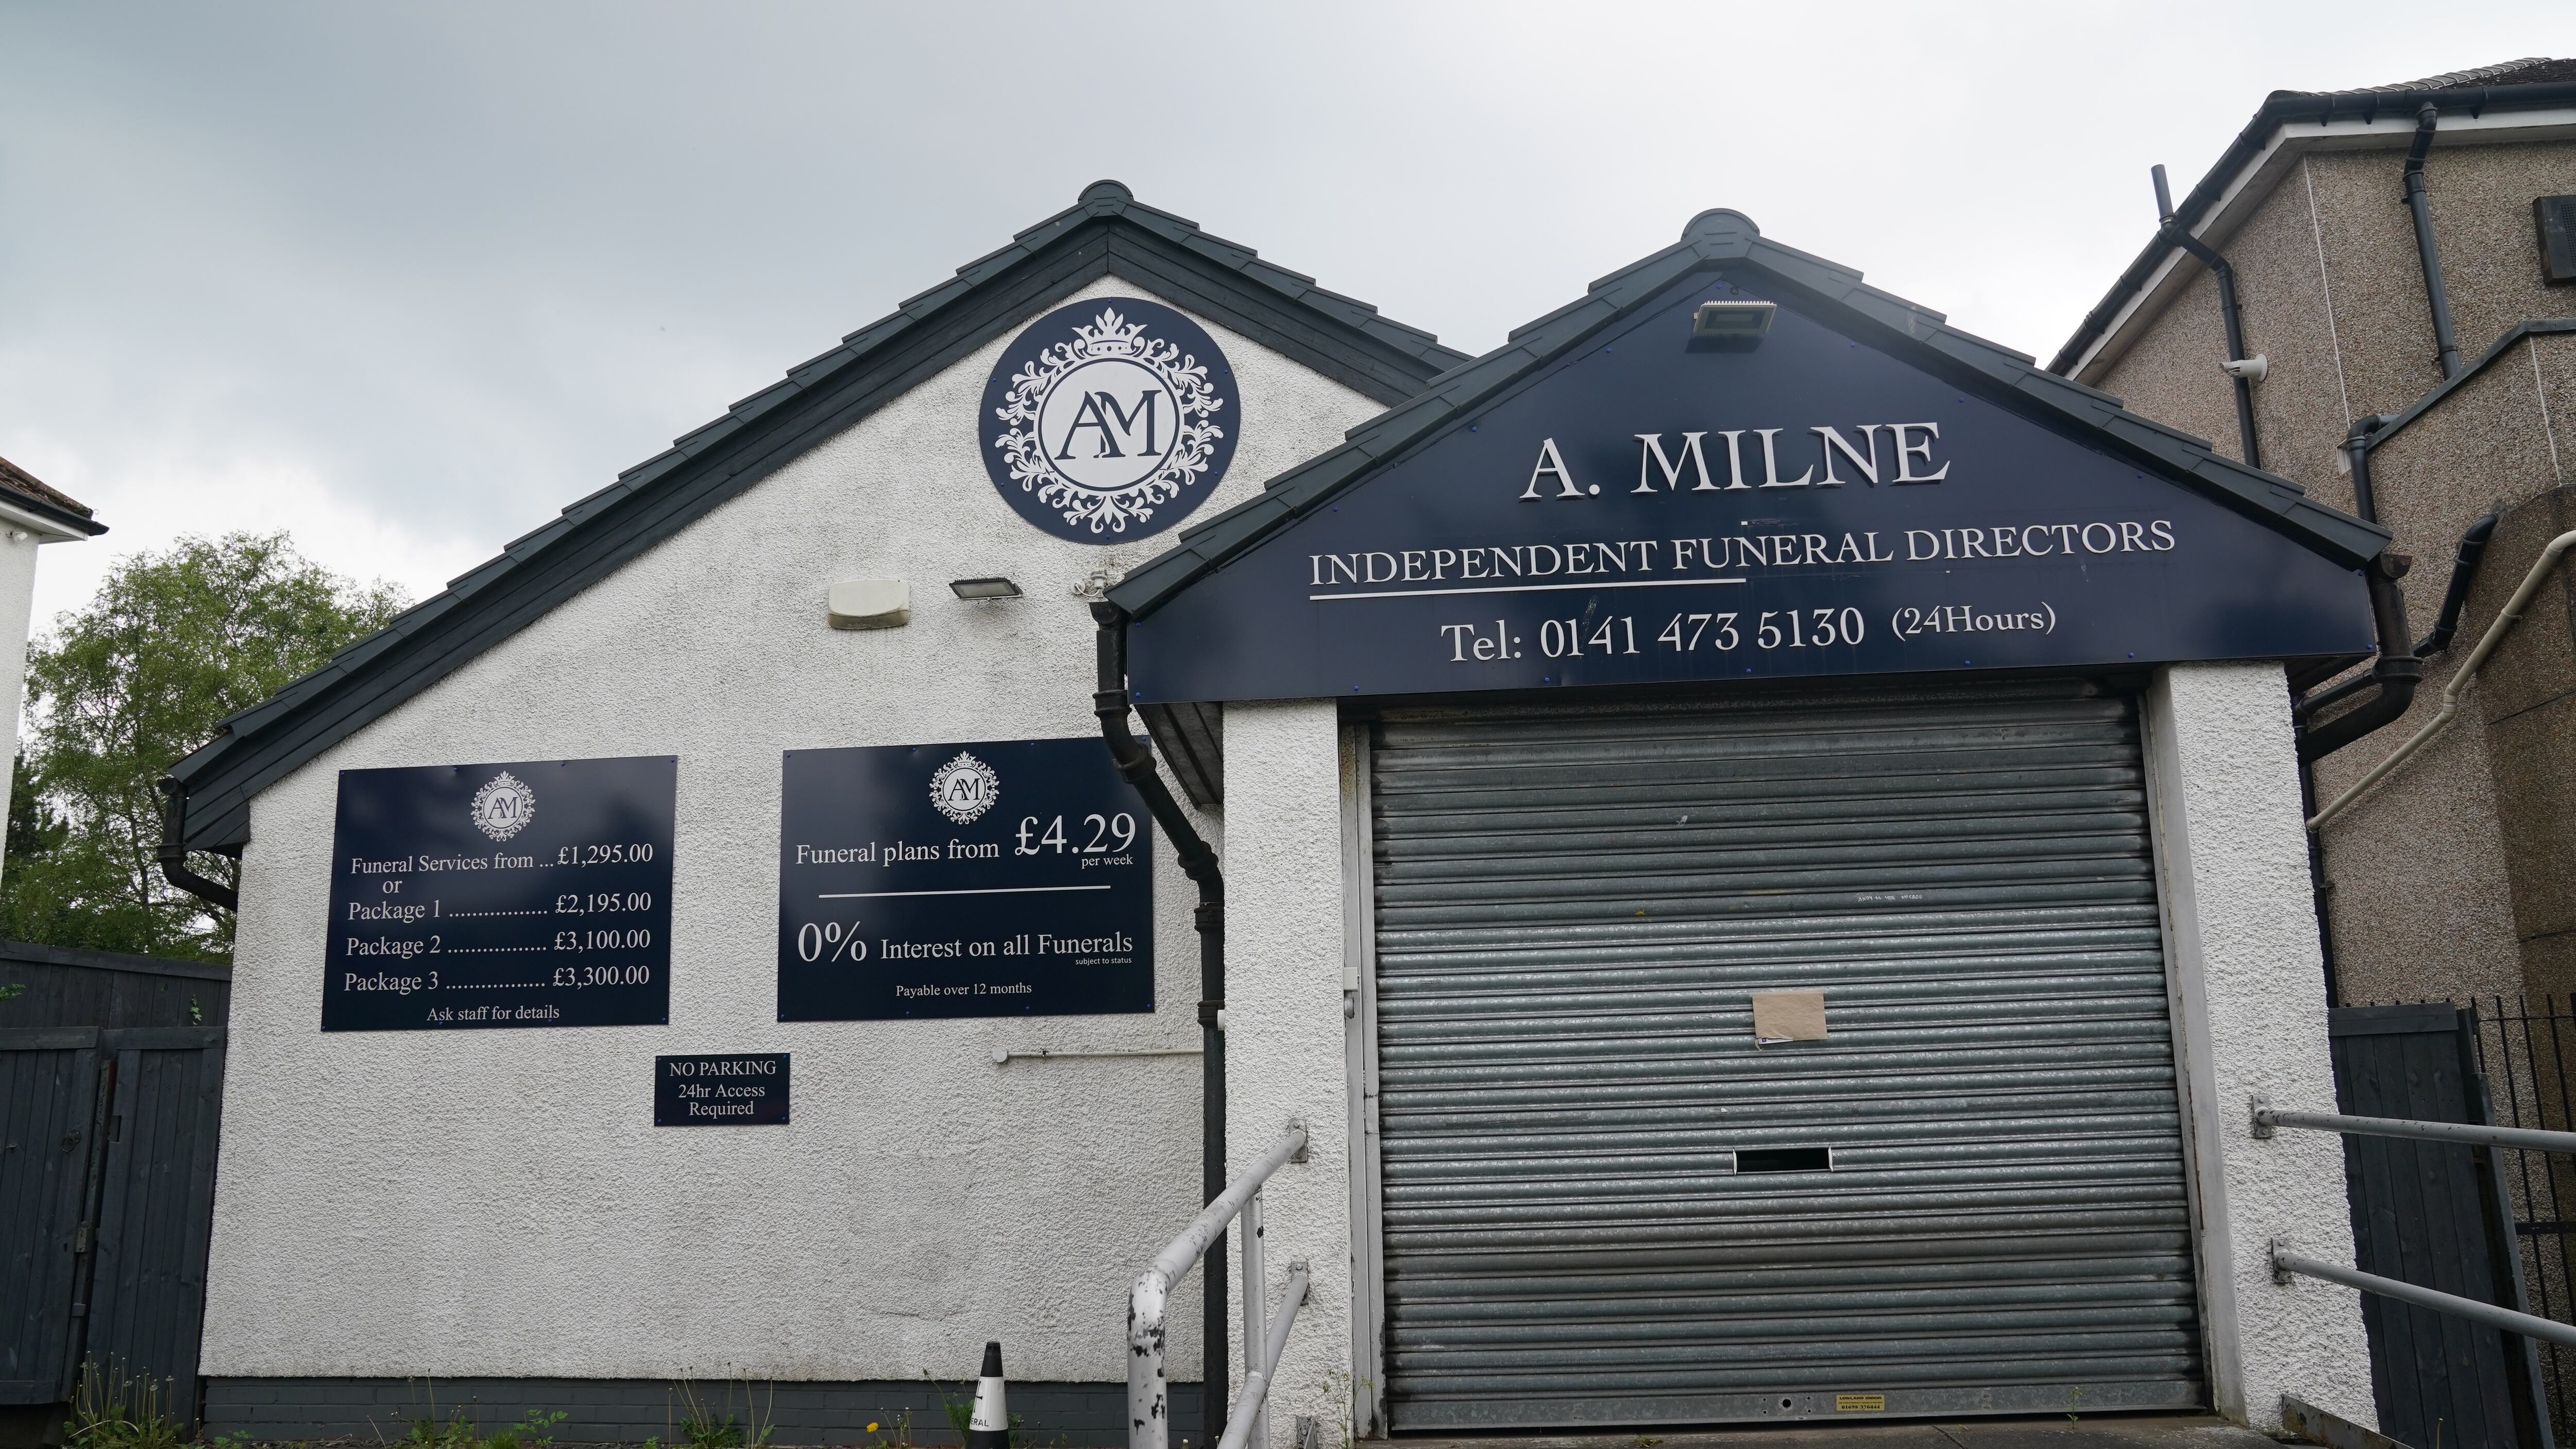 Police are investigating A. Milne funeral directors